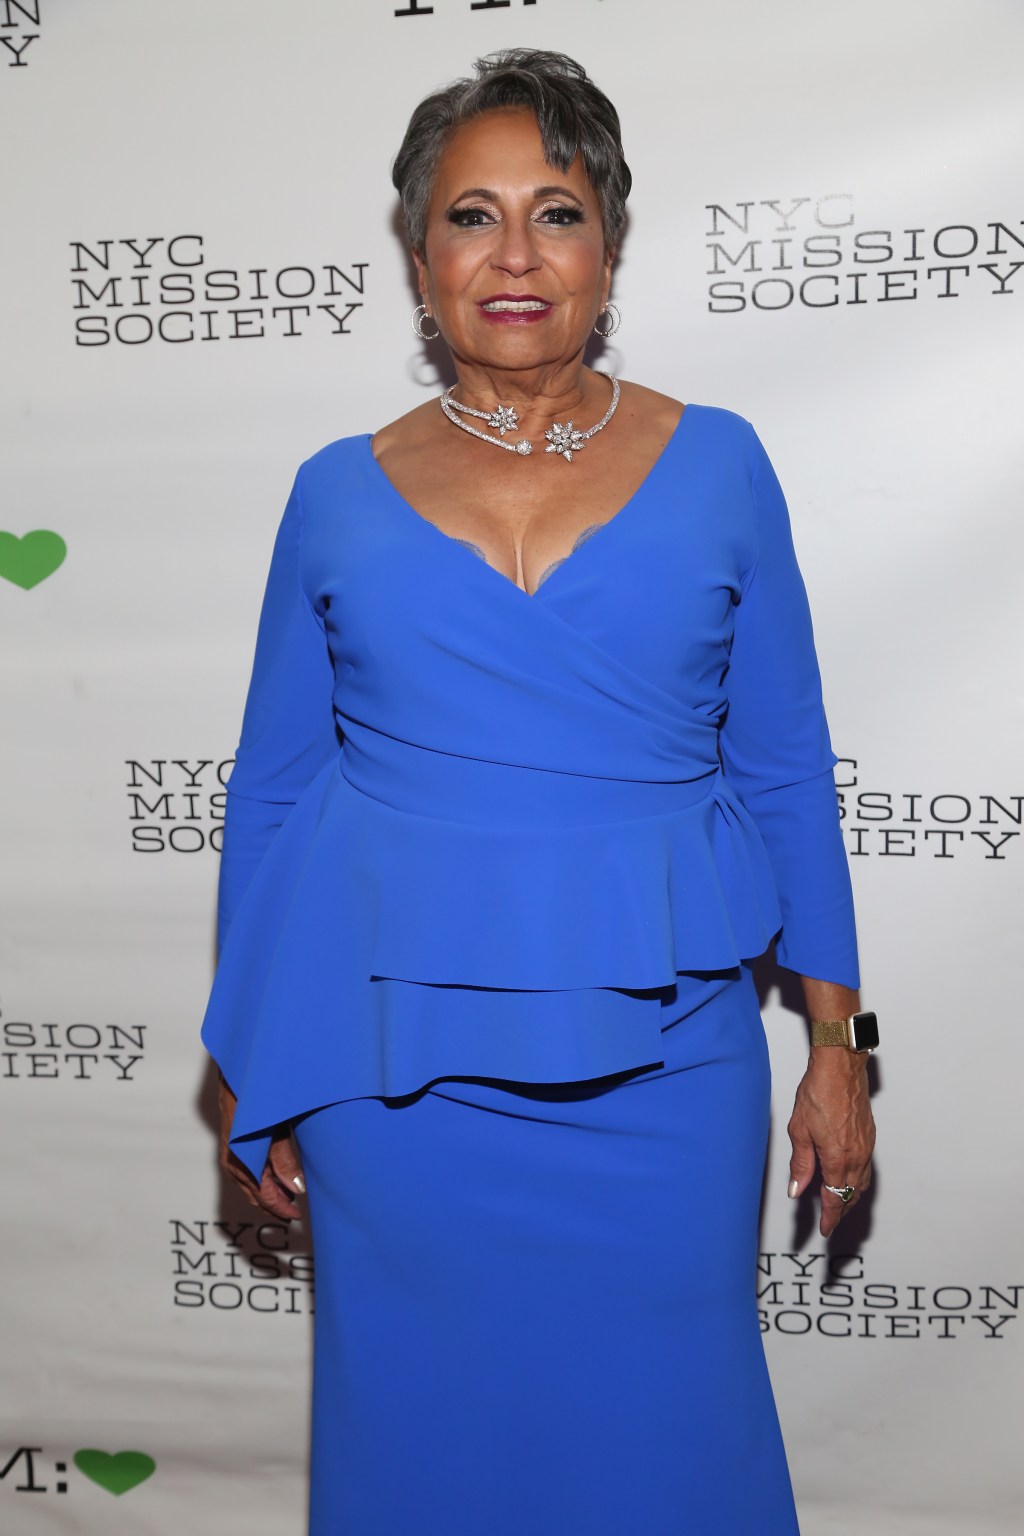 2018 Champions for Children Gala - NYC Mission Society